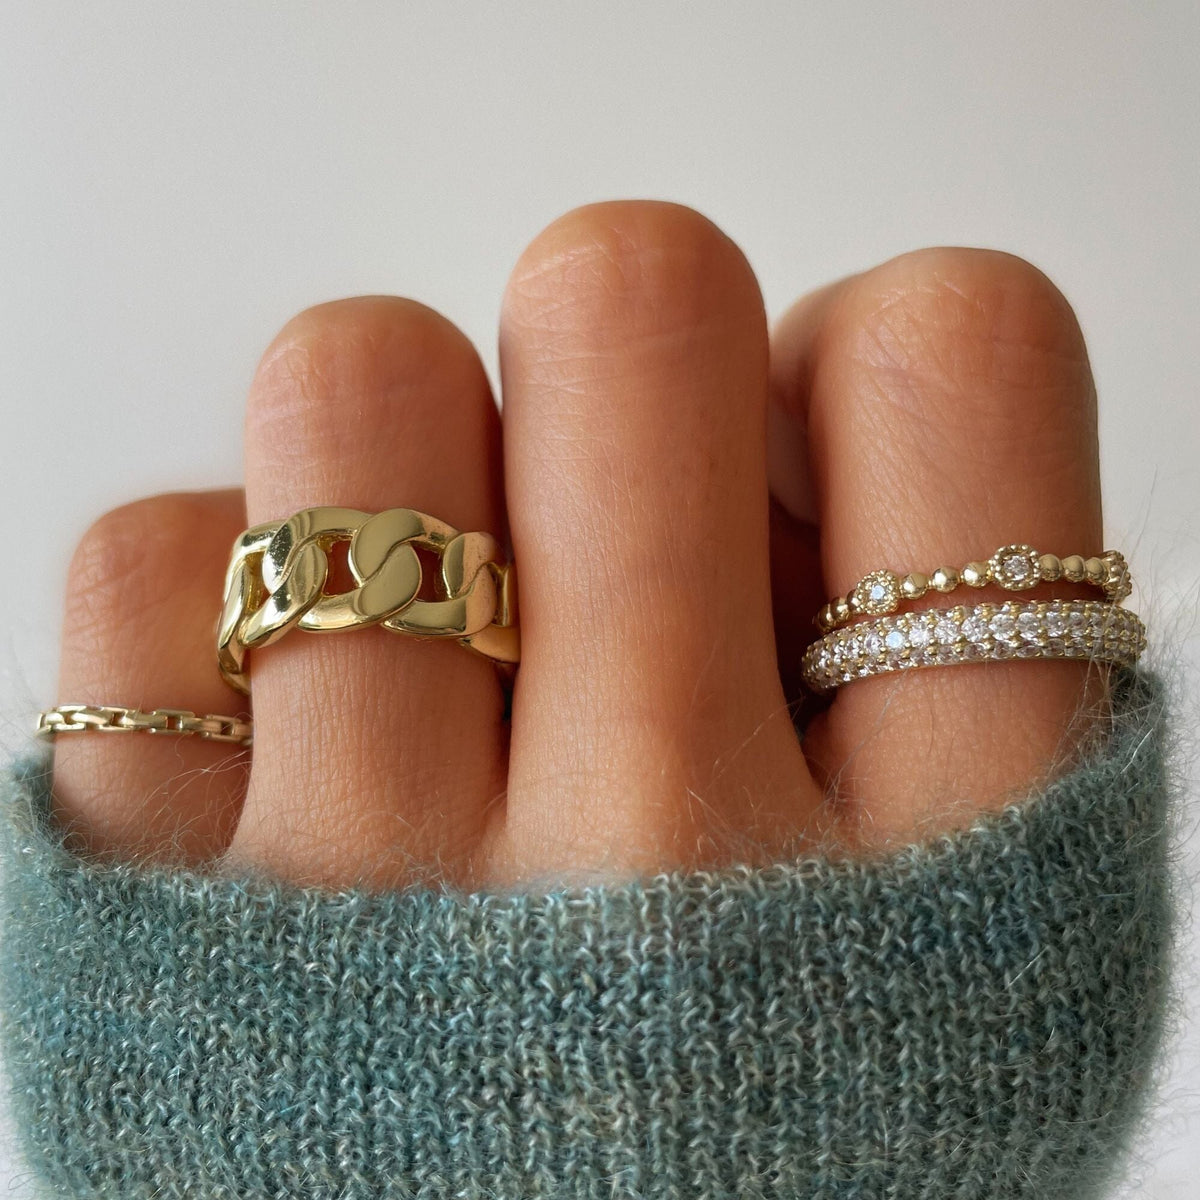 Curb Chain Ring Sterling / Bold / Preorder*